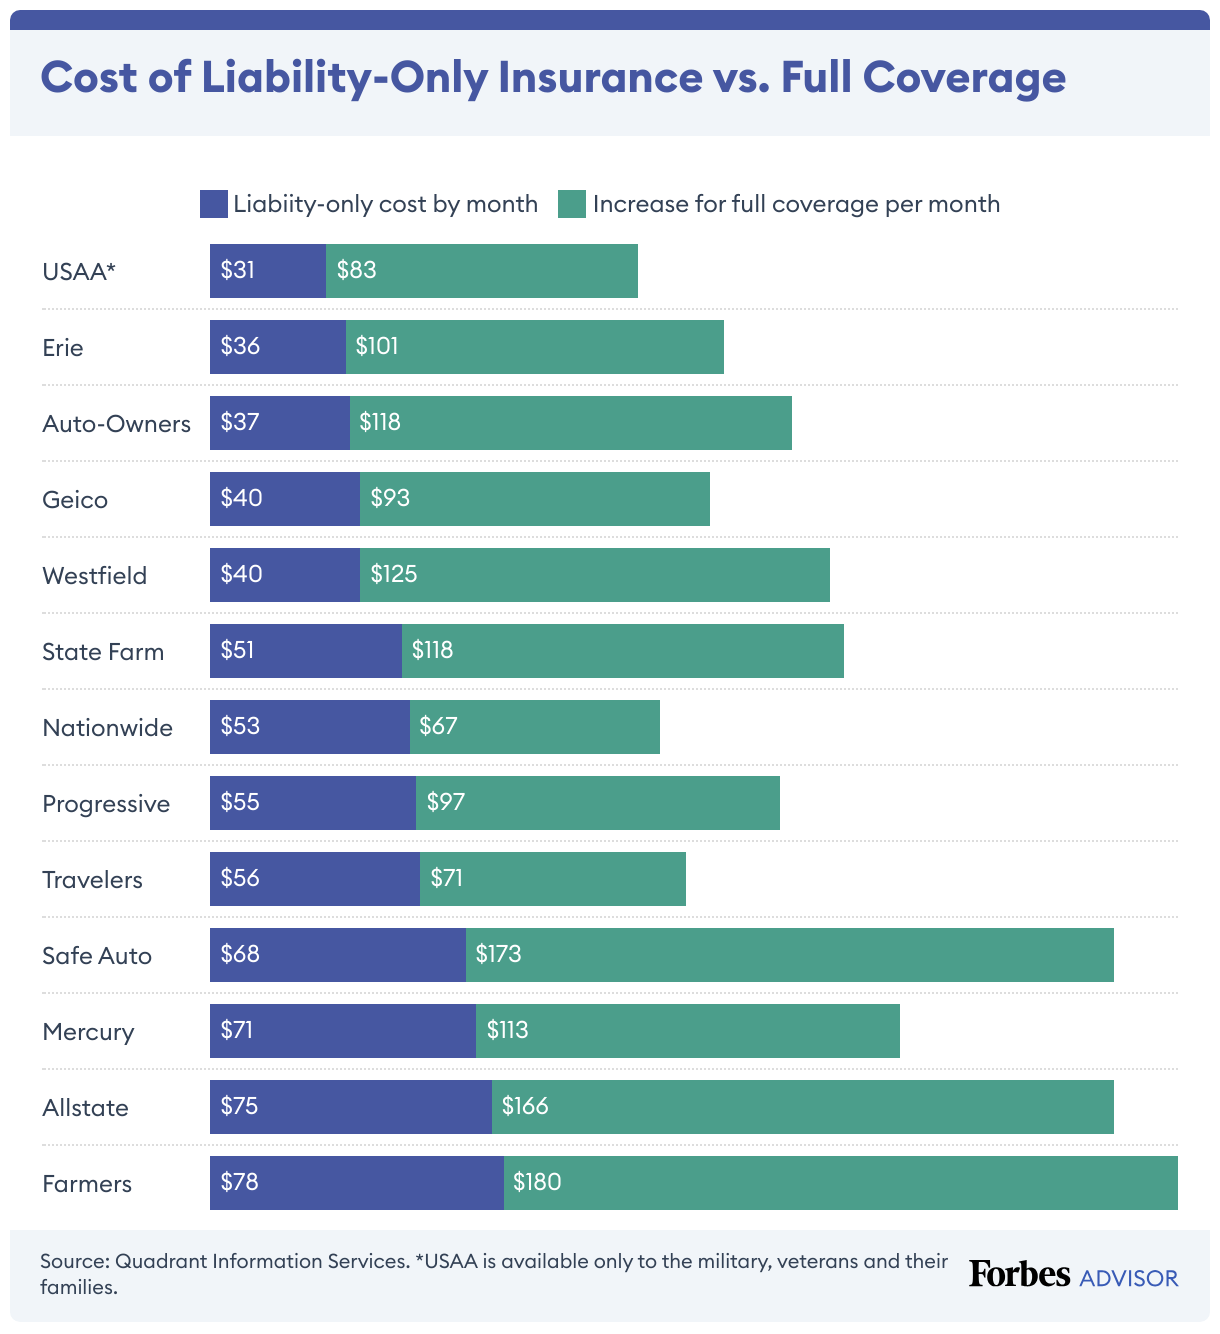 USAA has the lowest rates for liability-only rates while Farmers has the highest.